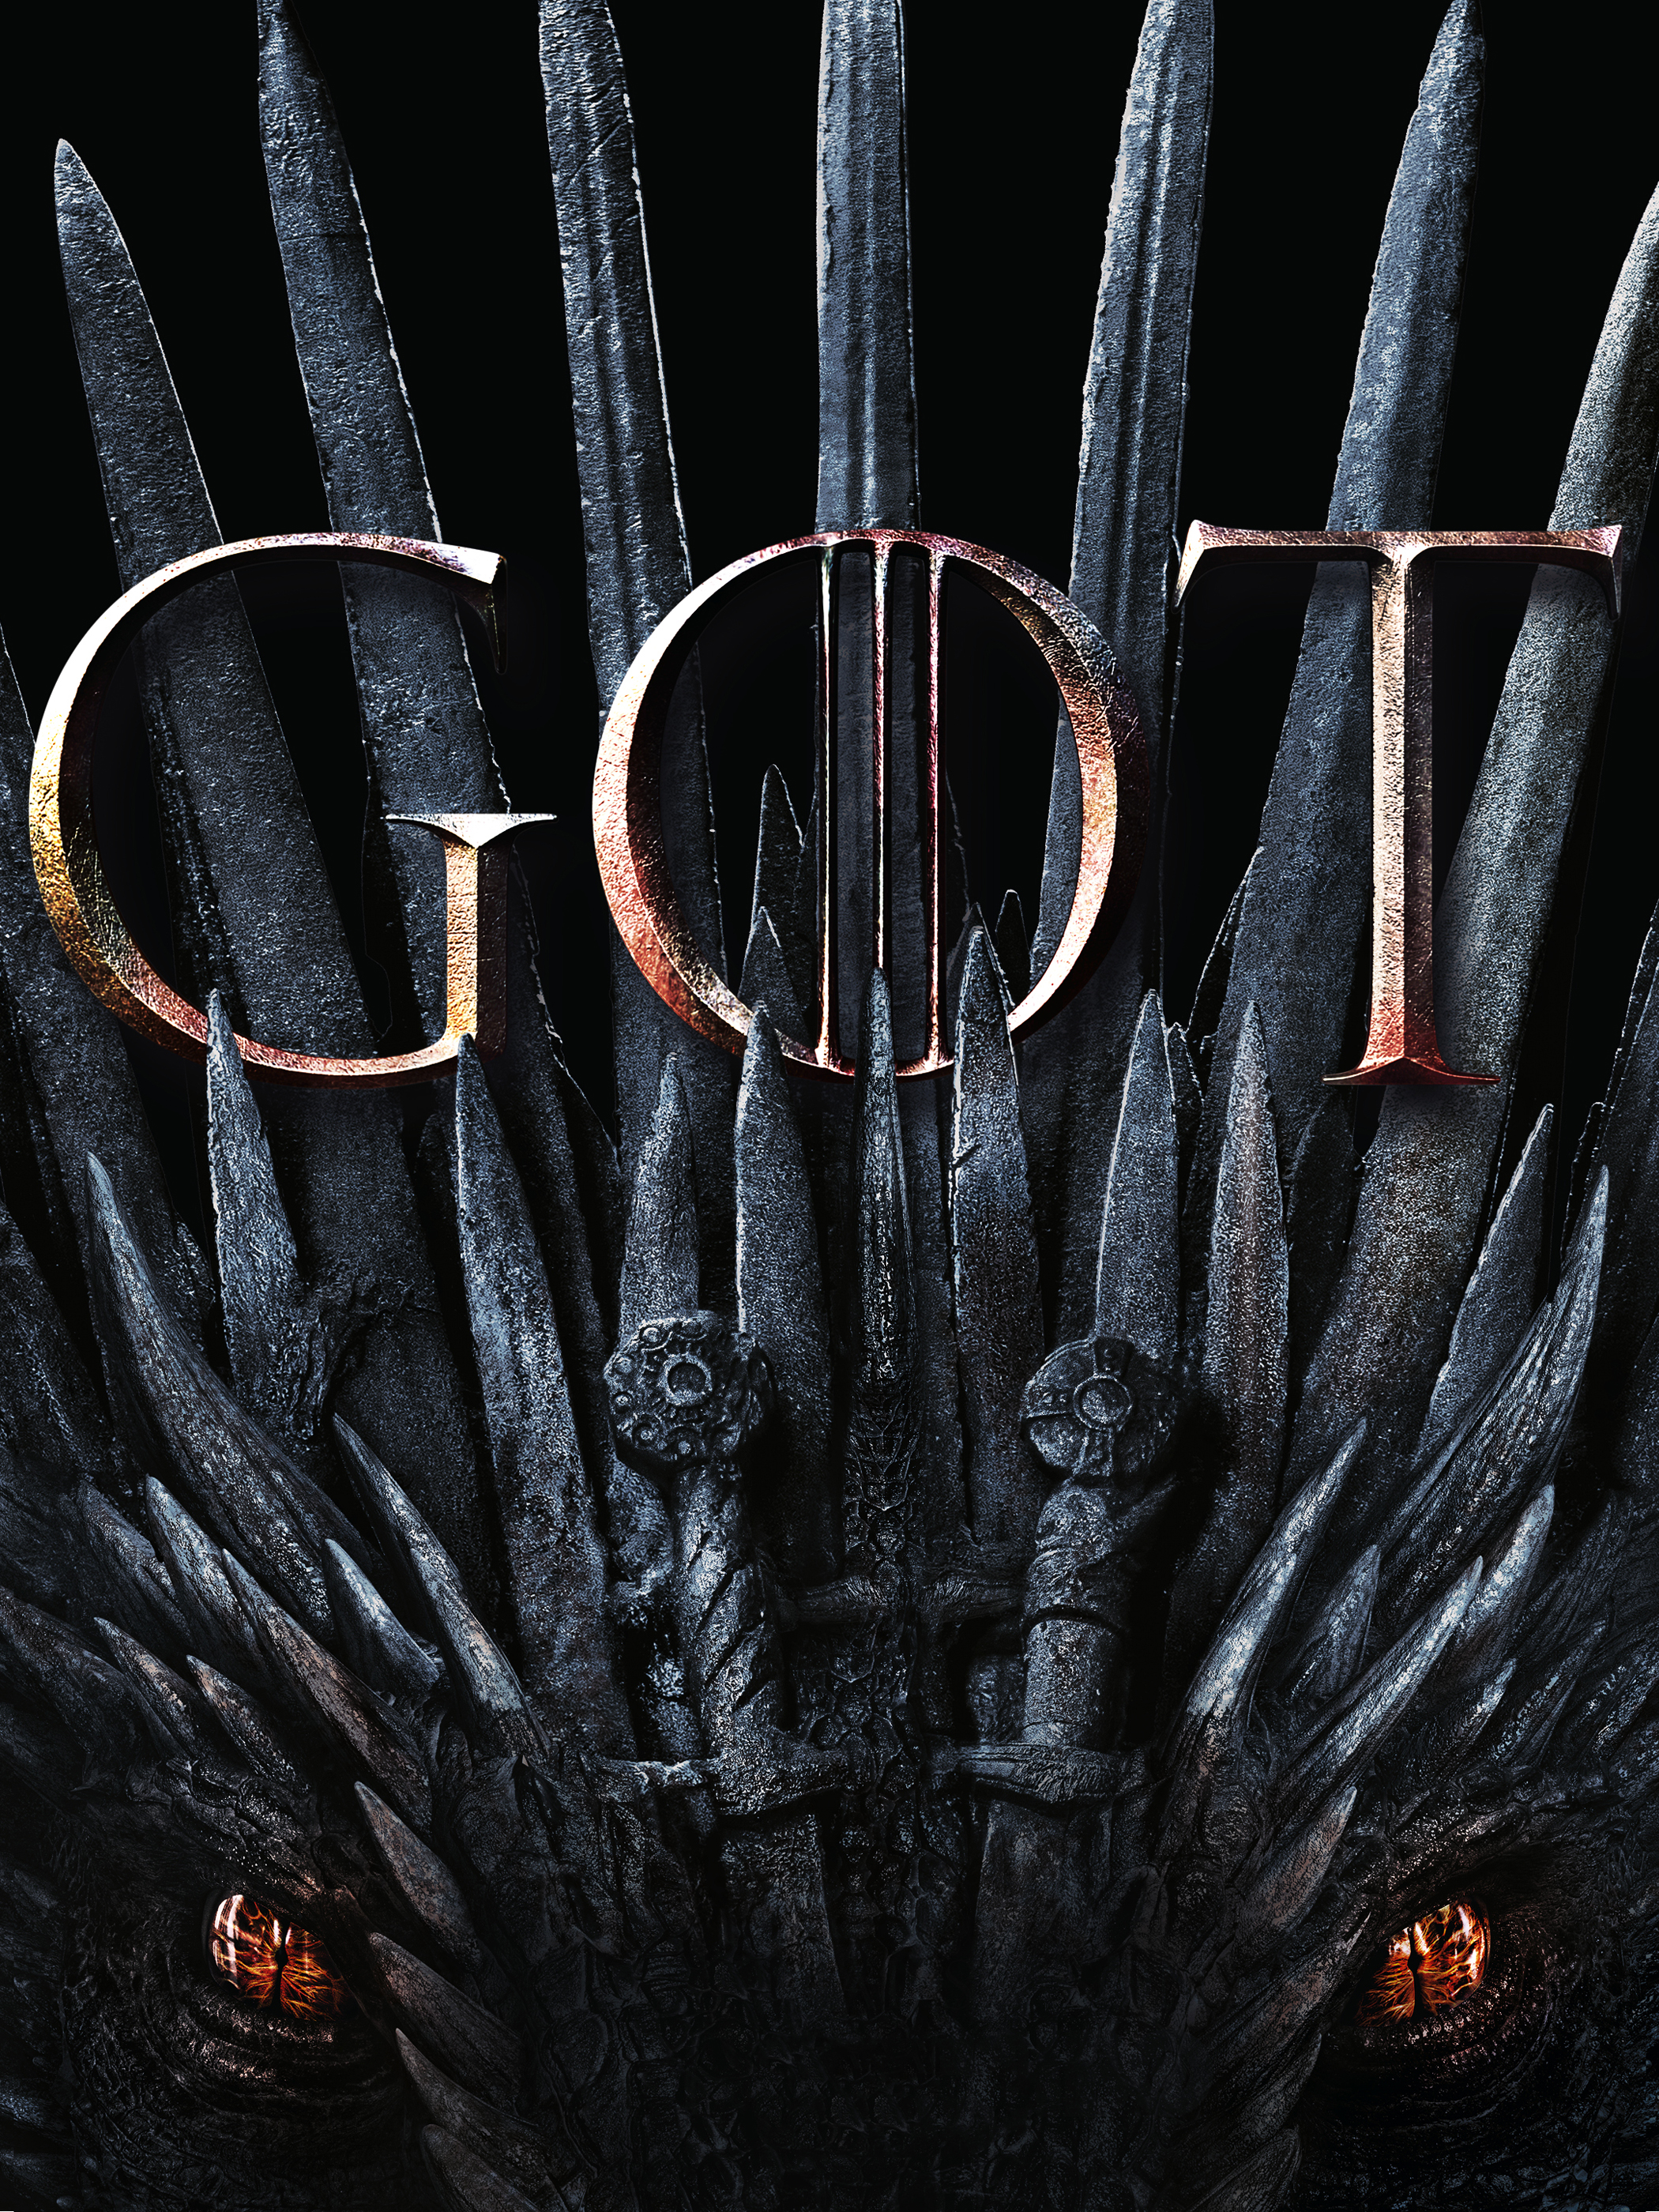 Game of Thrones streaming: Where can you watch every episode of GoT online?, TV & Radio, Showbiz & TV